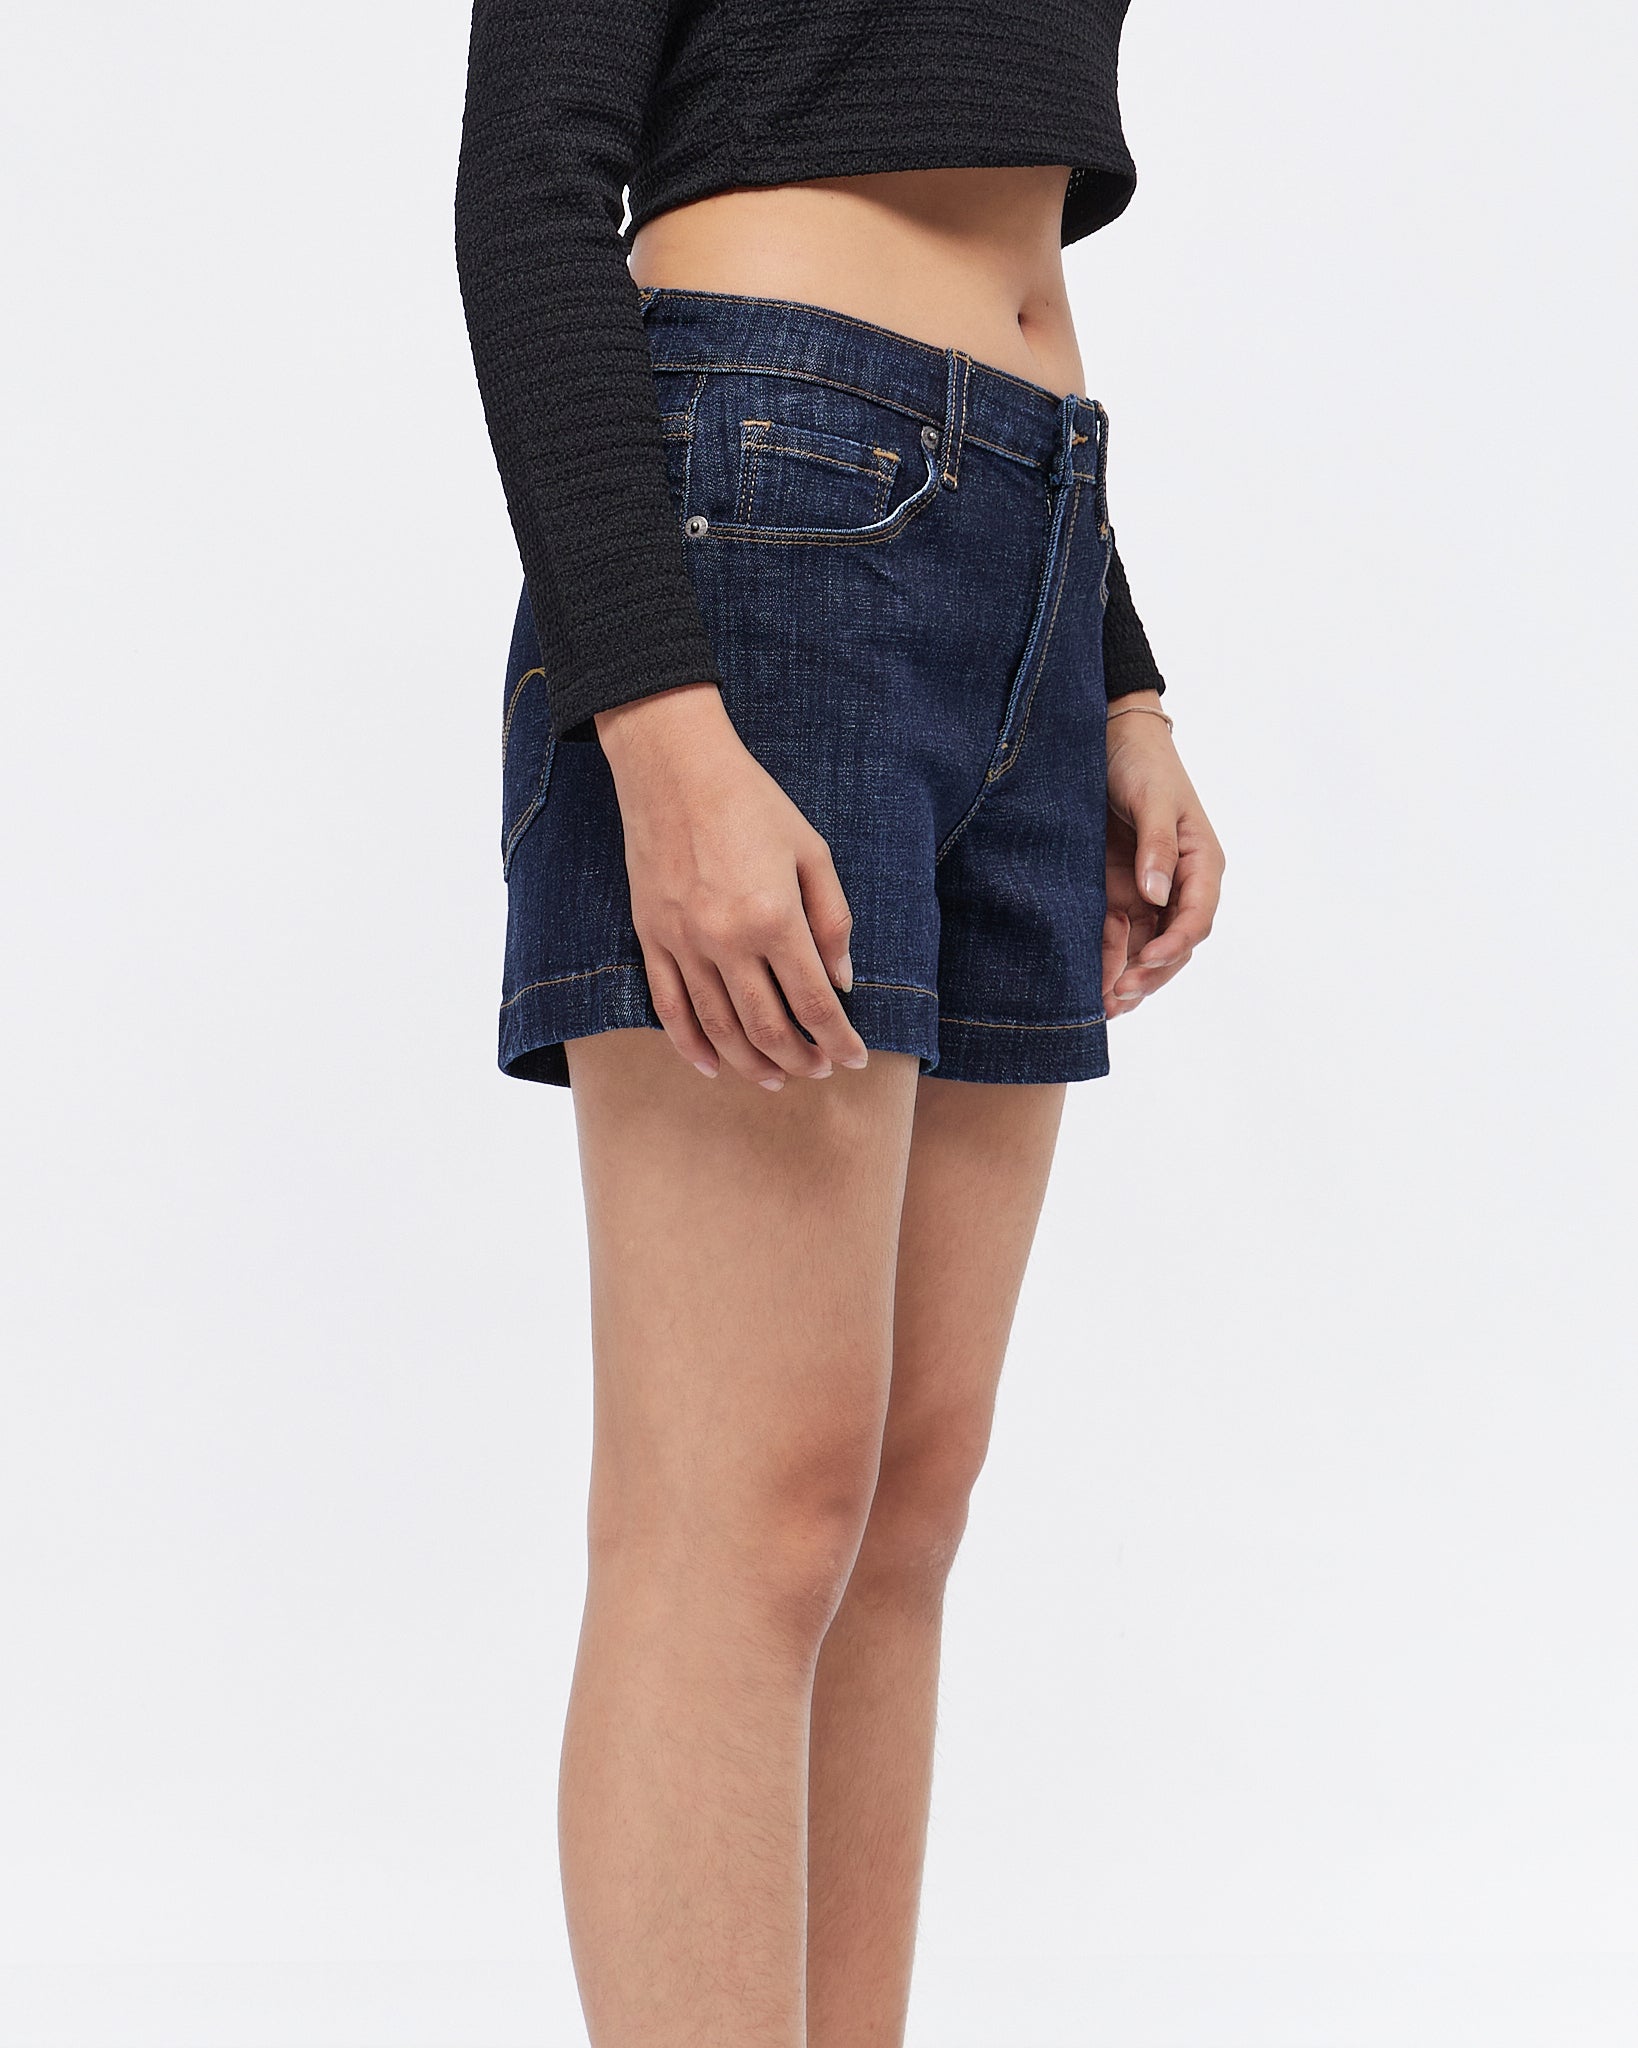 MOI OUTFIT-High Waist Lady Short Jeans 14.50